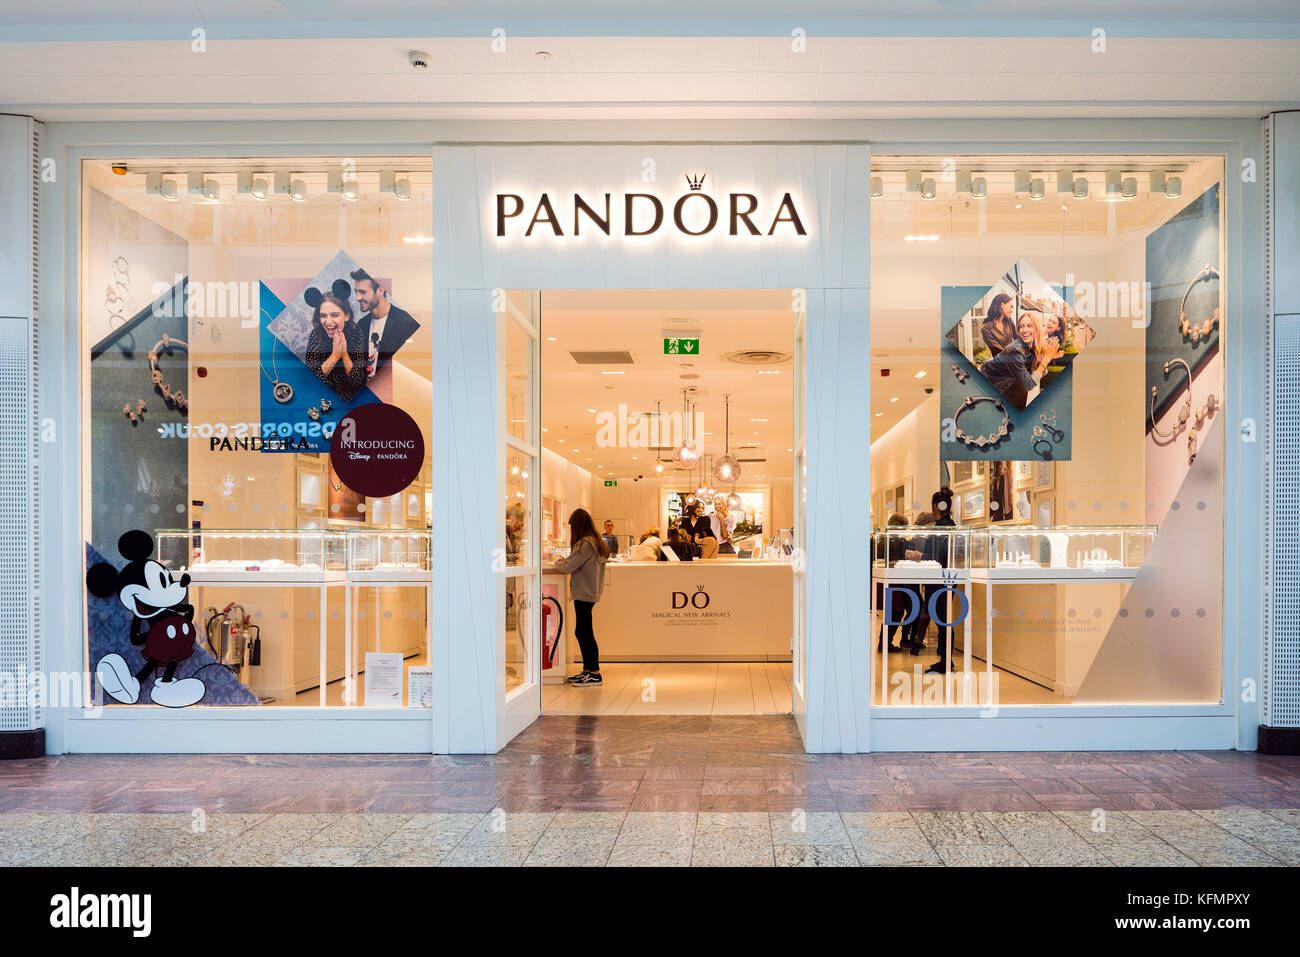 Pandora Shop High Resolution Stock Photography and Images - Alamy